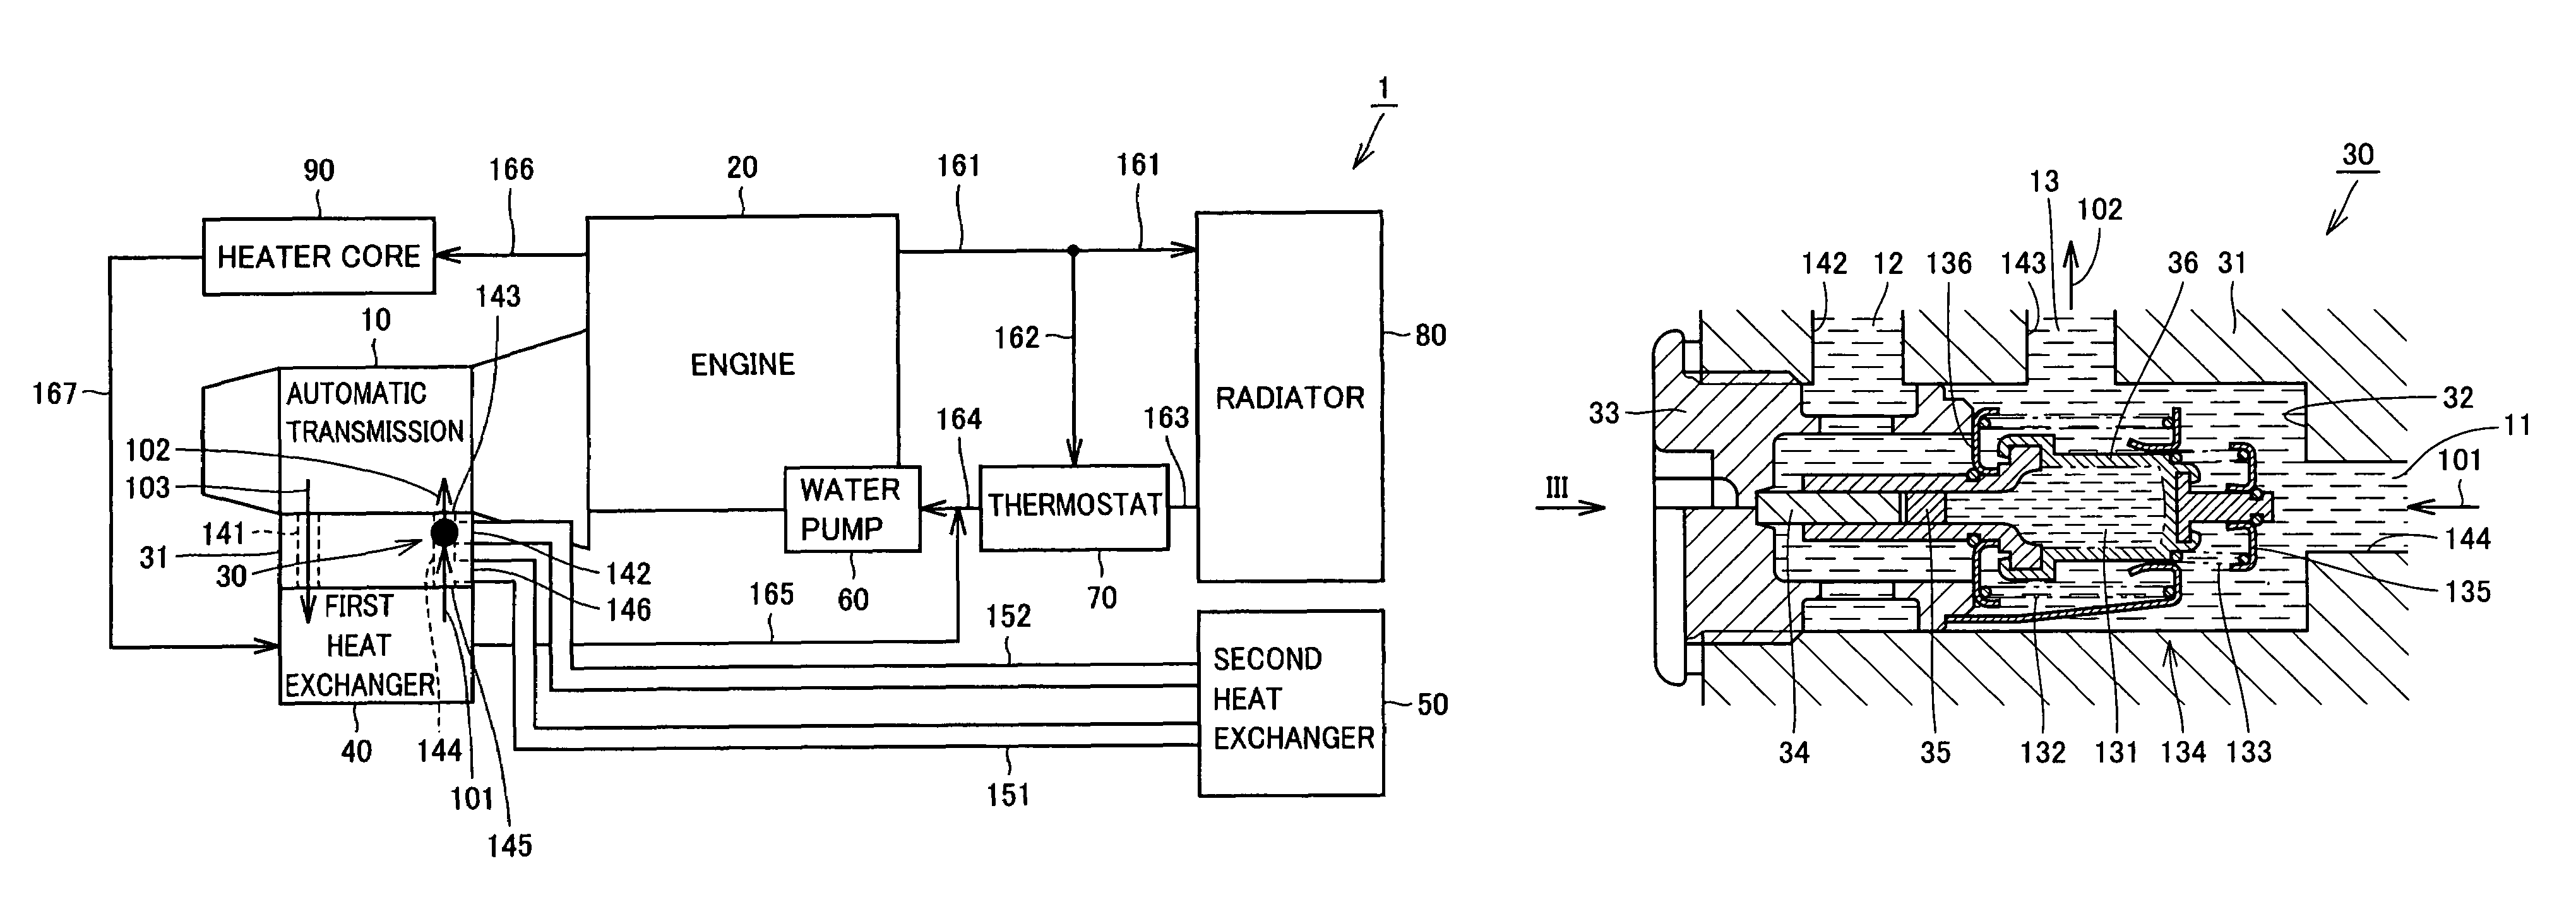 Heat exchanger structure of automatic transmission